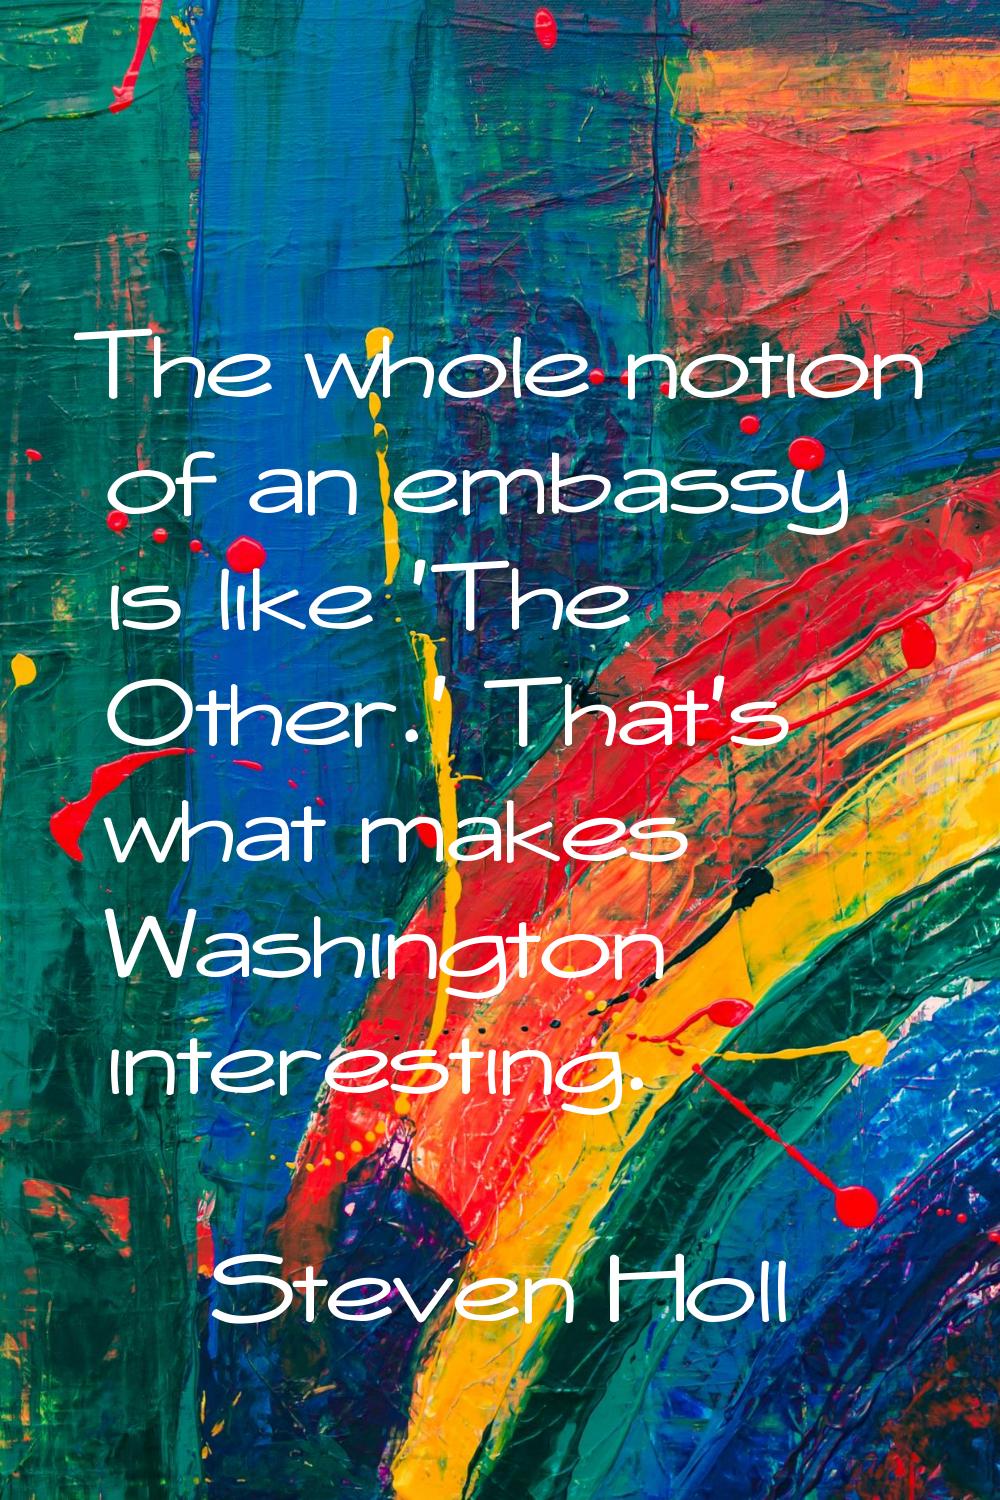 The whole notion of an embassy is like 'The Other.' That's what makes Washington interesting.